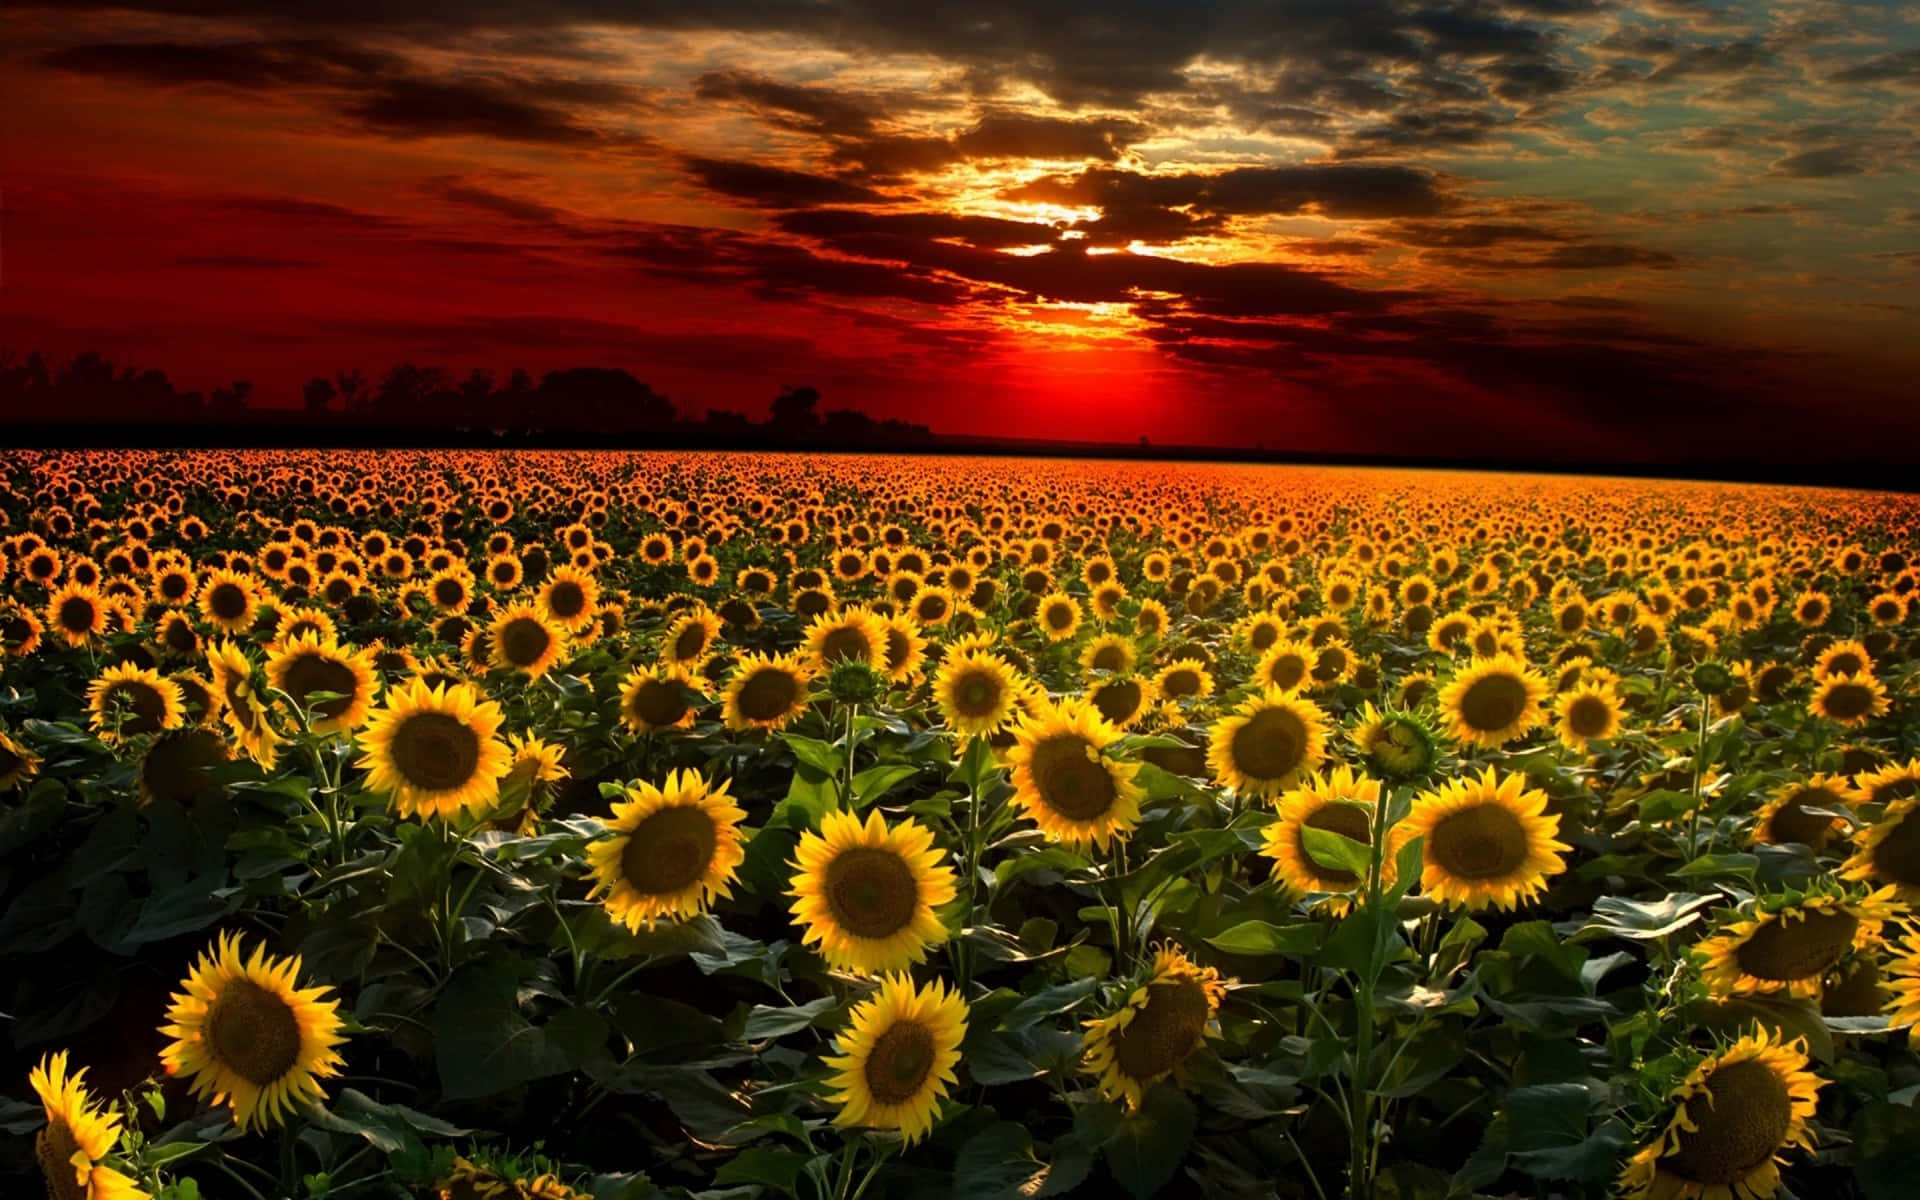 sunflowers in the field at sunset